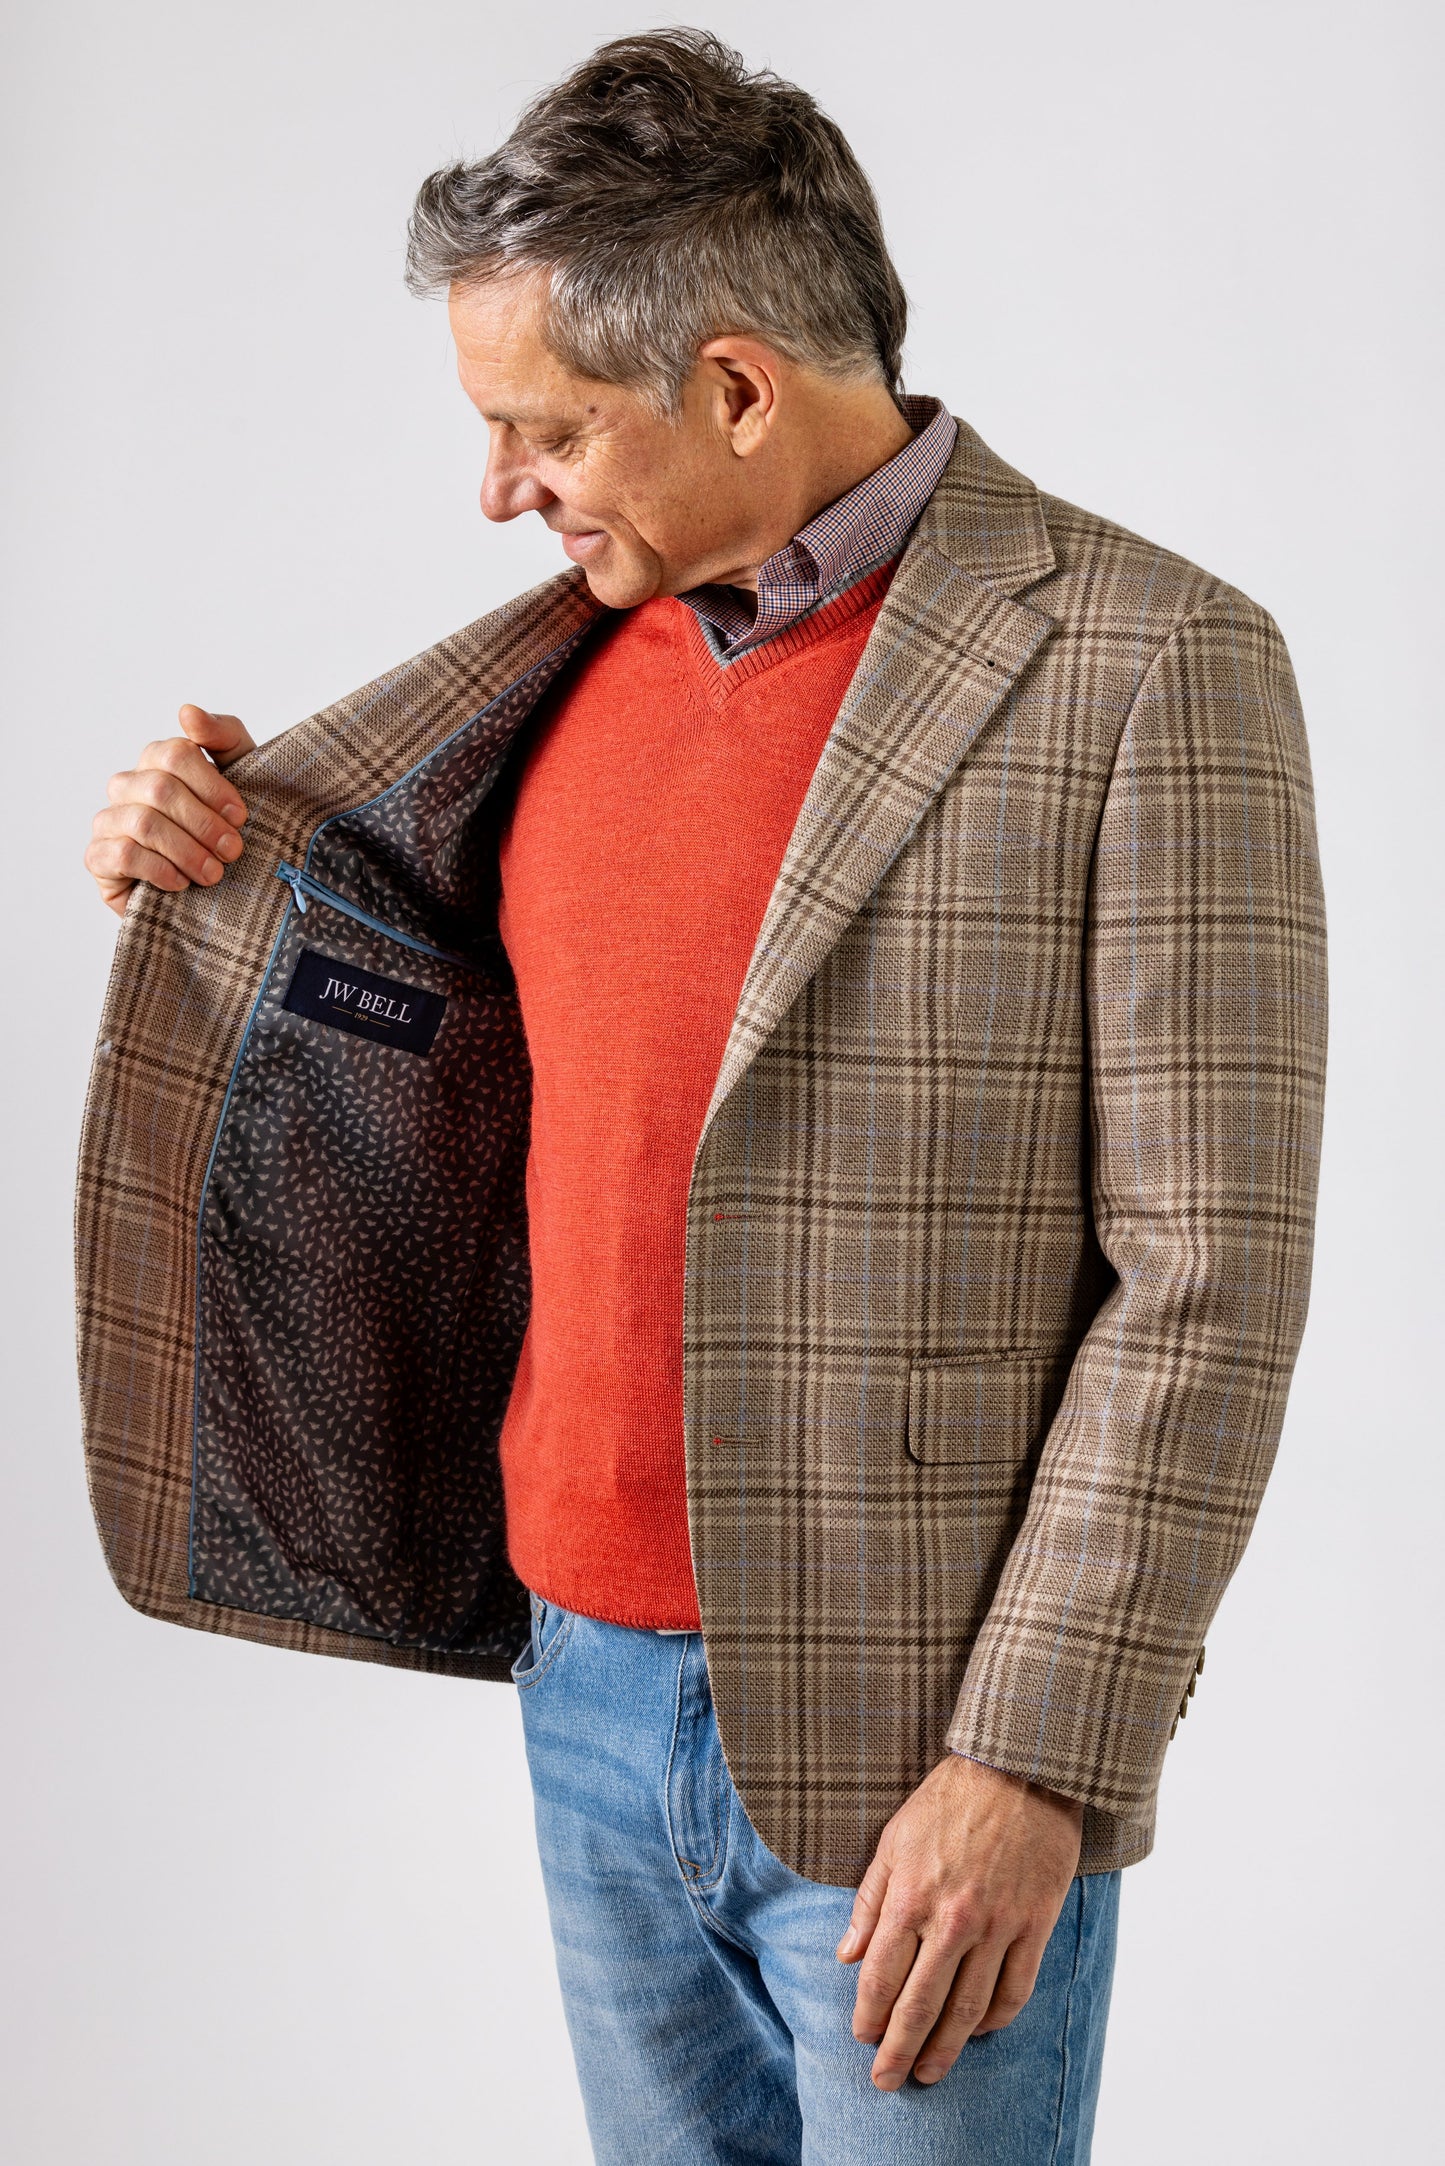 Tan Plaid with Blue and Lavender Deco Wool Sport Coat